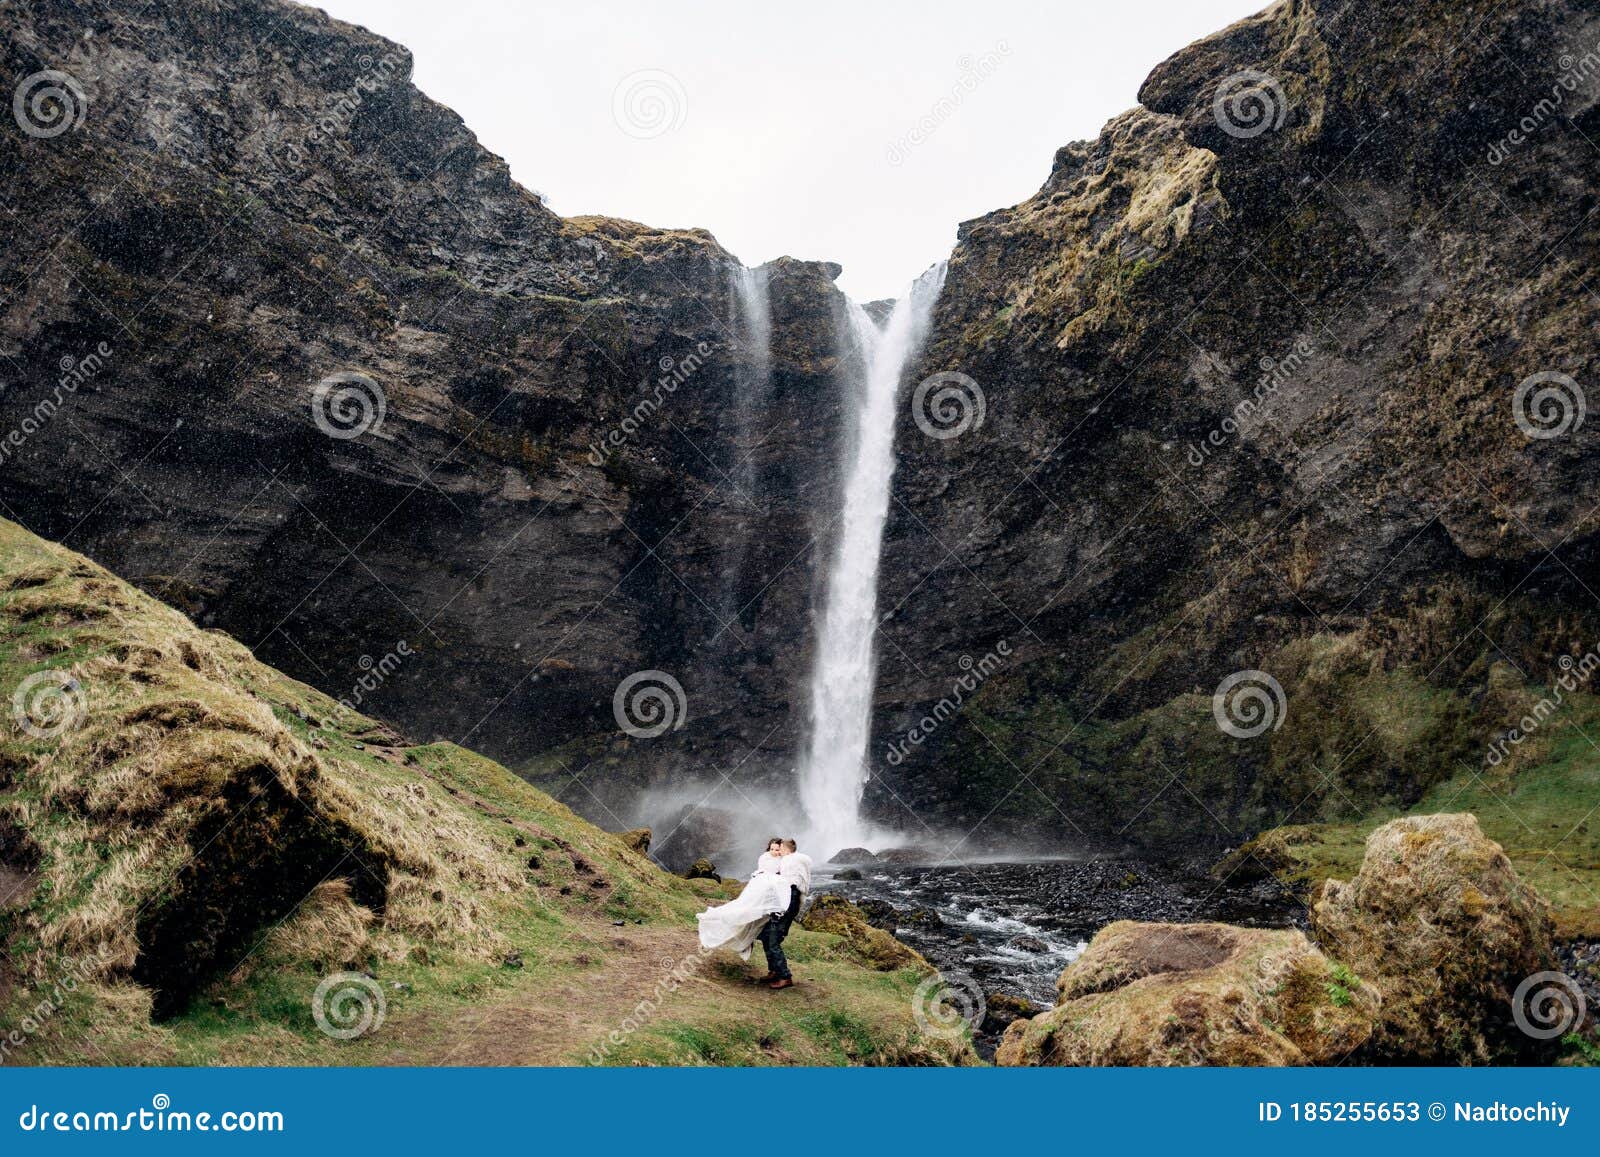 The Groom Circles The Bride In His Arms Near The Waterfall It Is Snowing Destination Iceland Wedding Near Kvernufoss Stock Image Image Of Rock Elopement